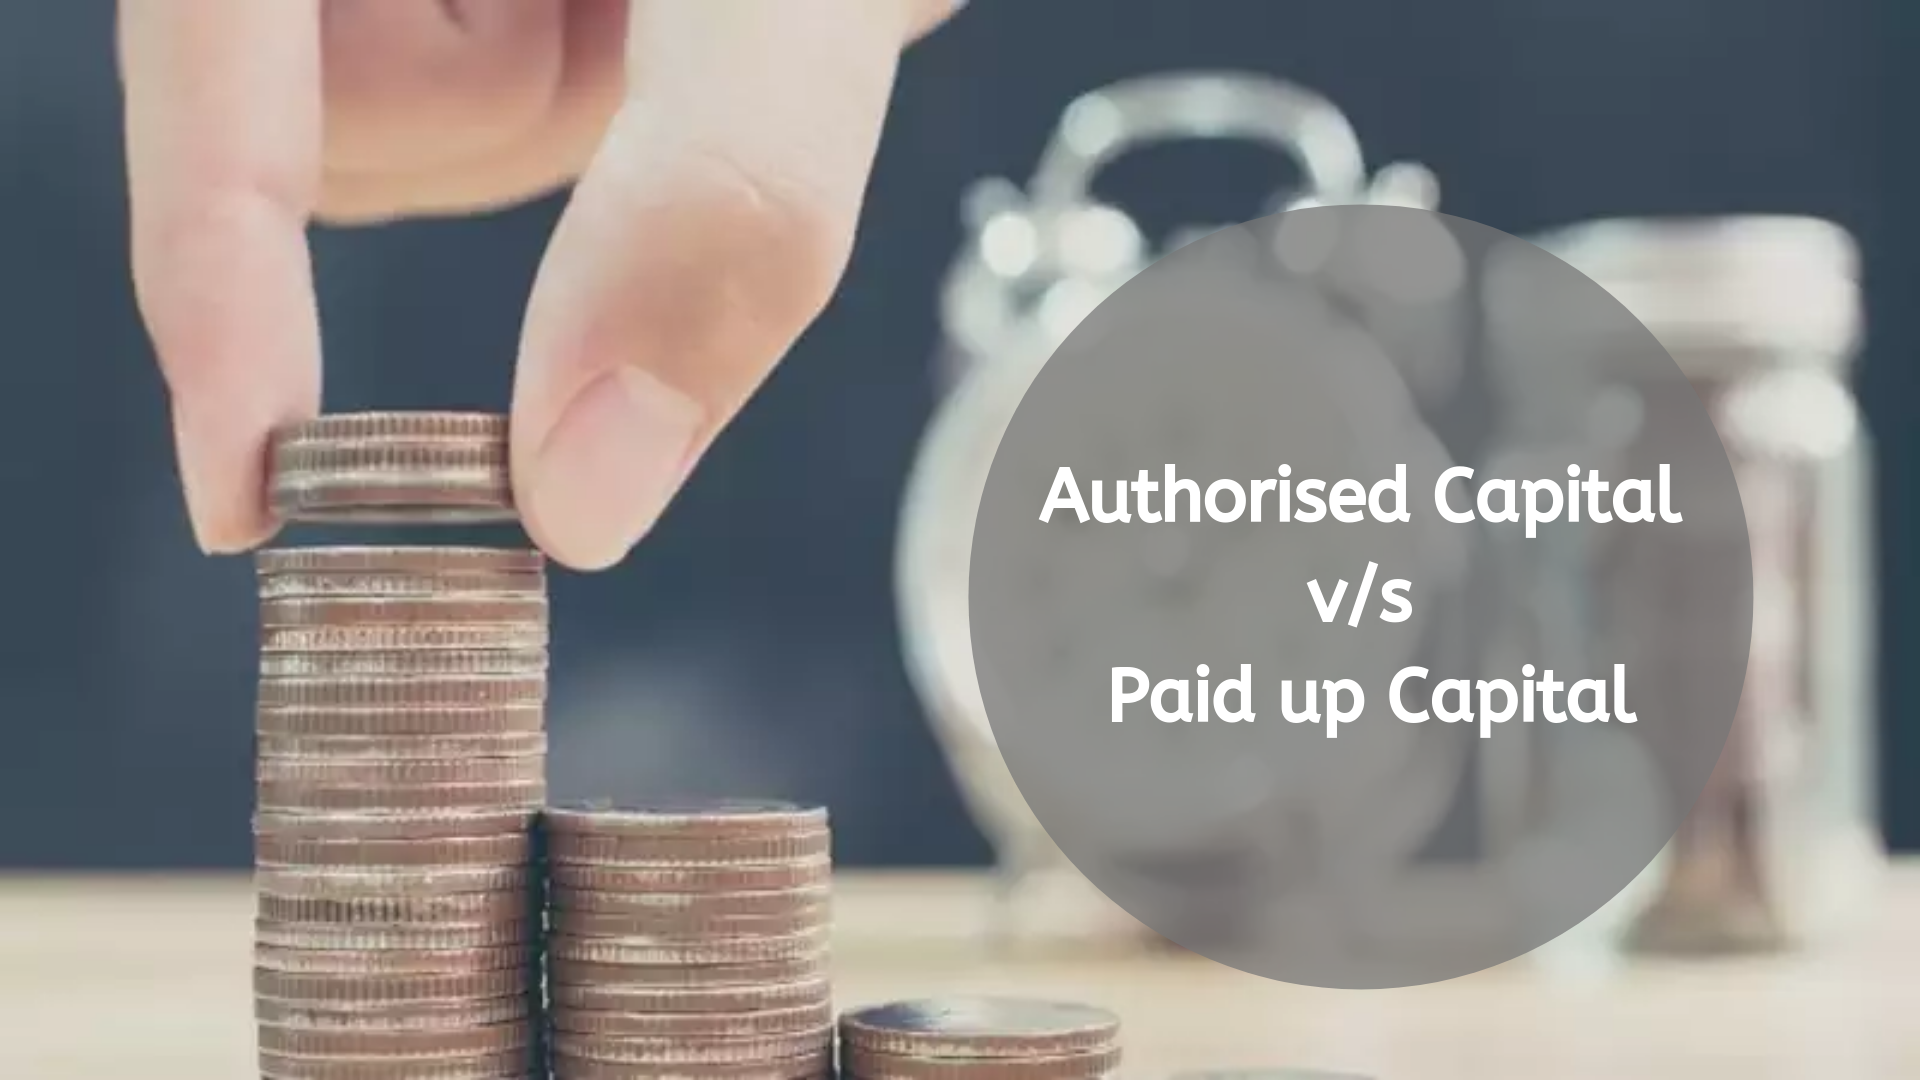 Comparison Between Authorised and Paid up Capital